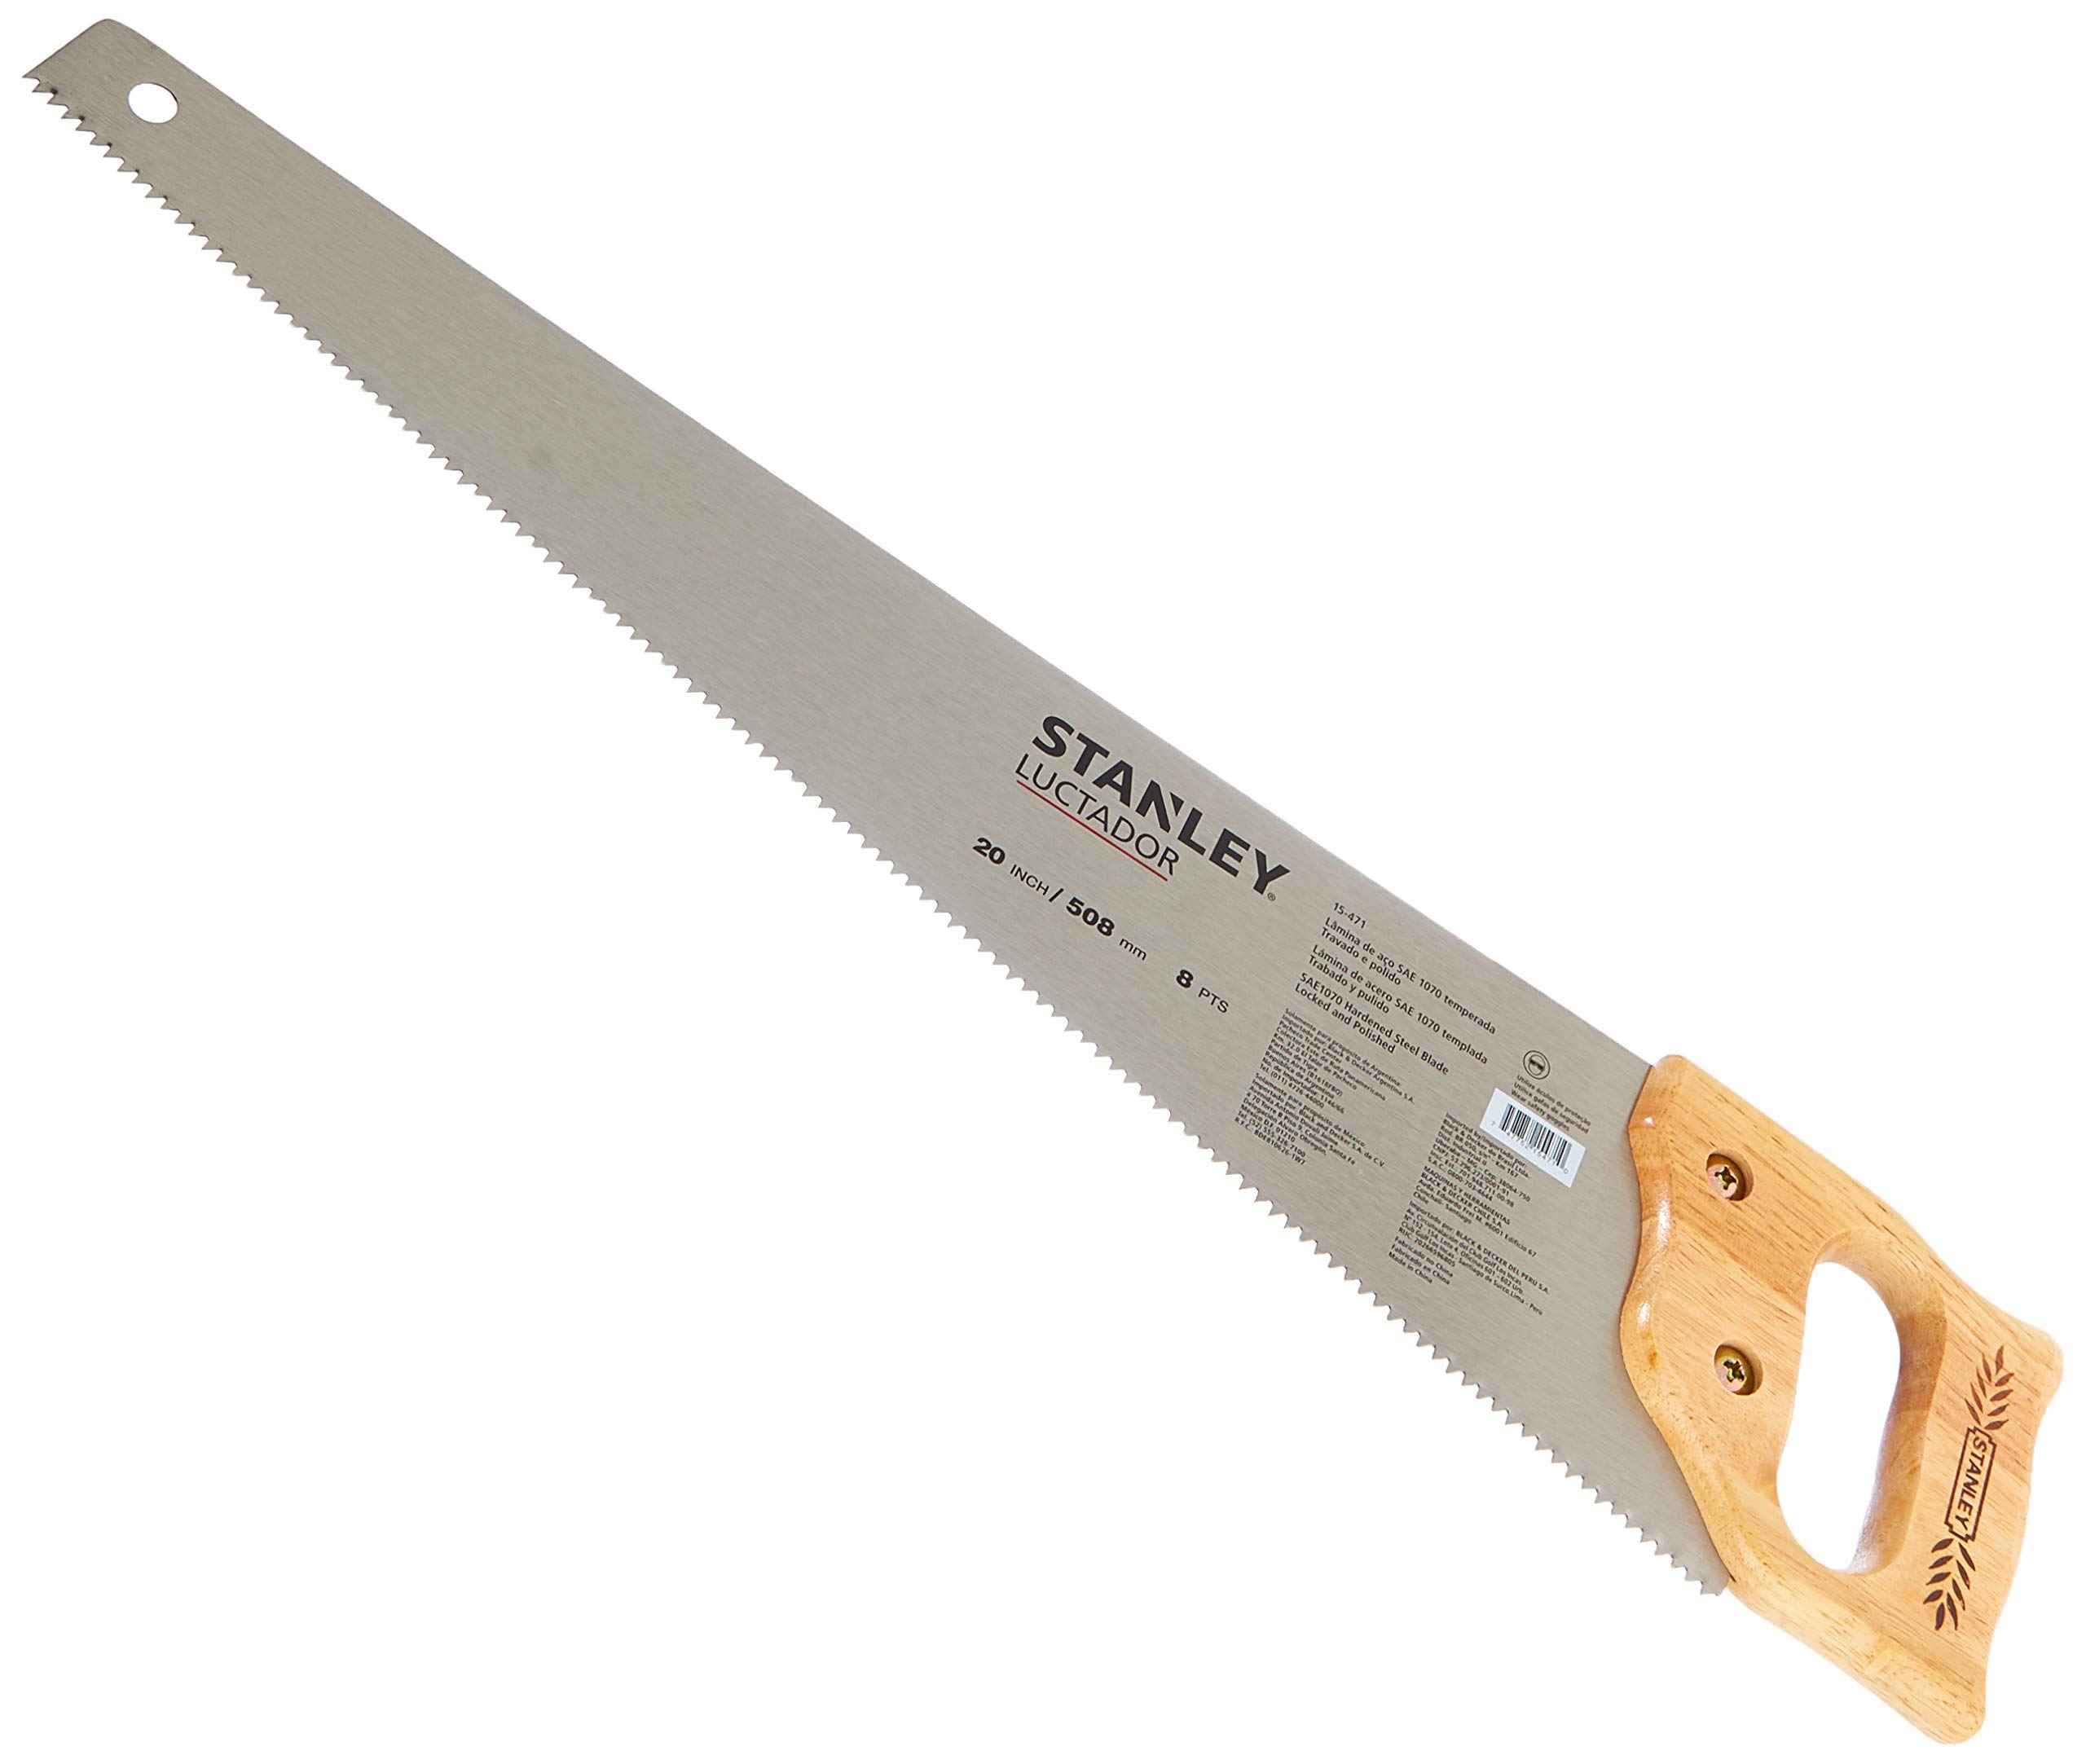 Stanley 18" Hand Saw - E-15470 | Supply Master, Accra, Ghana Hand Saws & Cutting Tools Buy Tools hardware Building materials